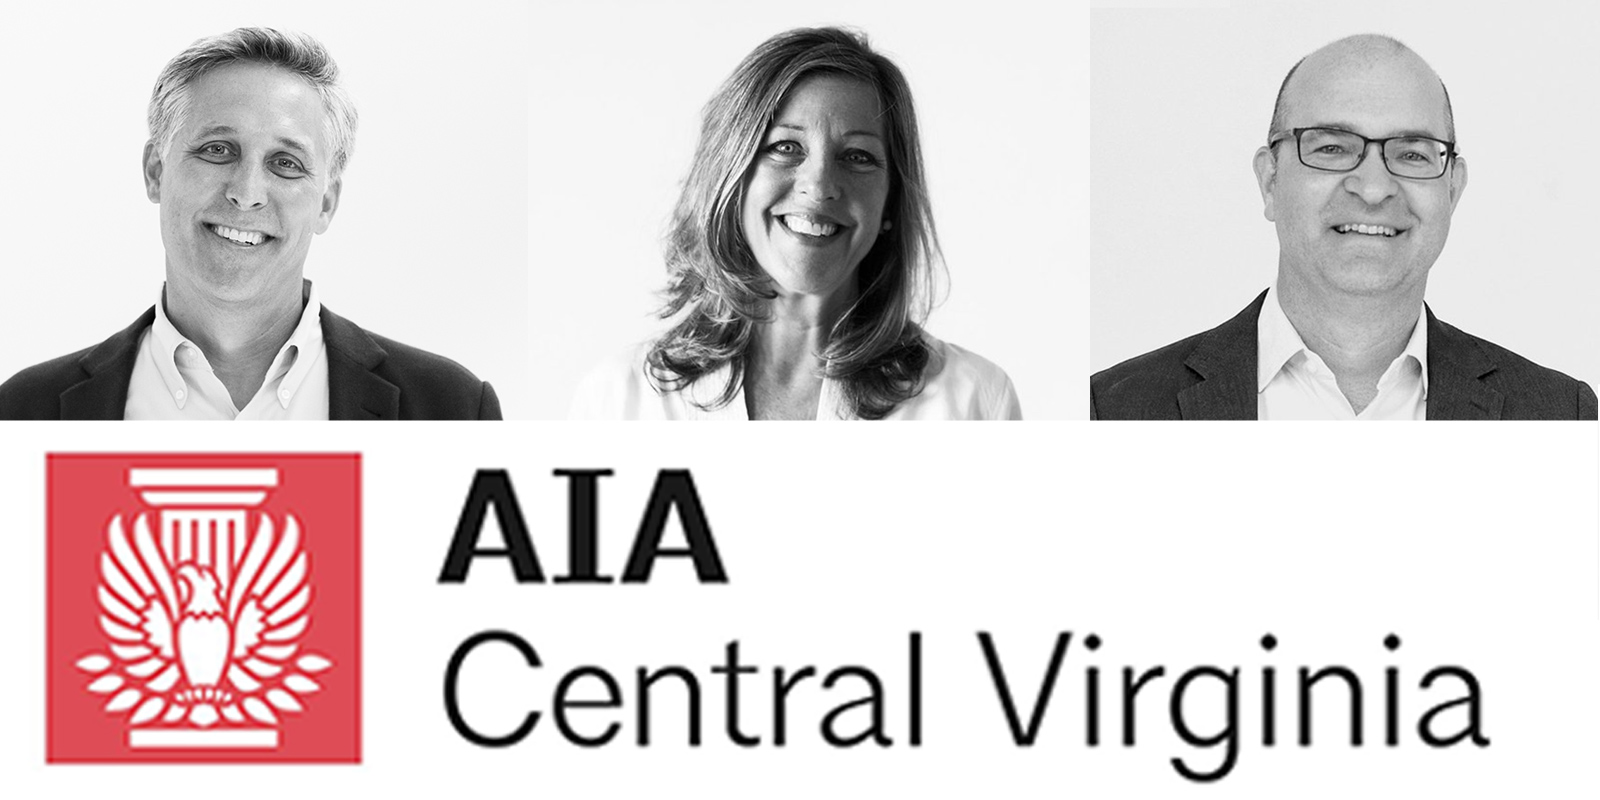 Three VMDO Leaders Take the Helm of AIA Central Virginia in 2020